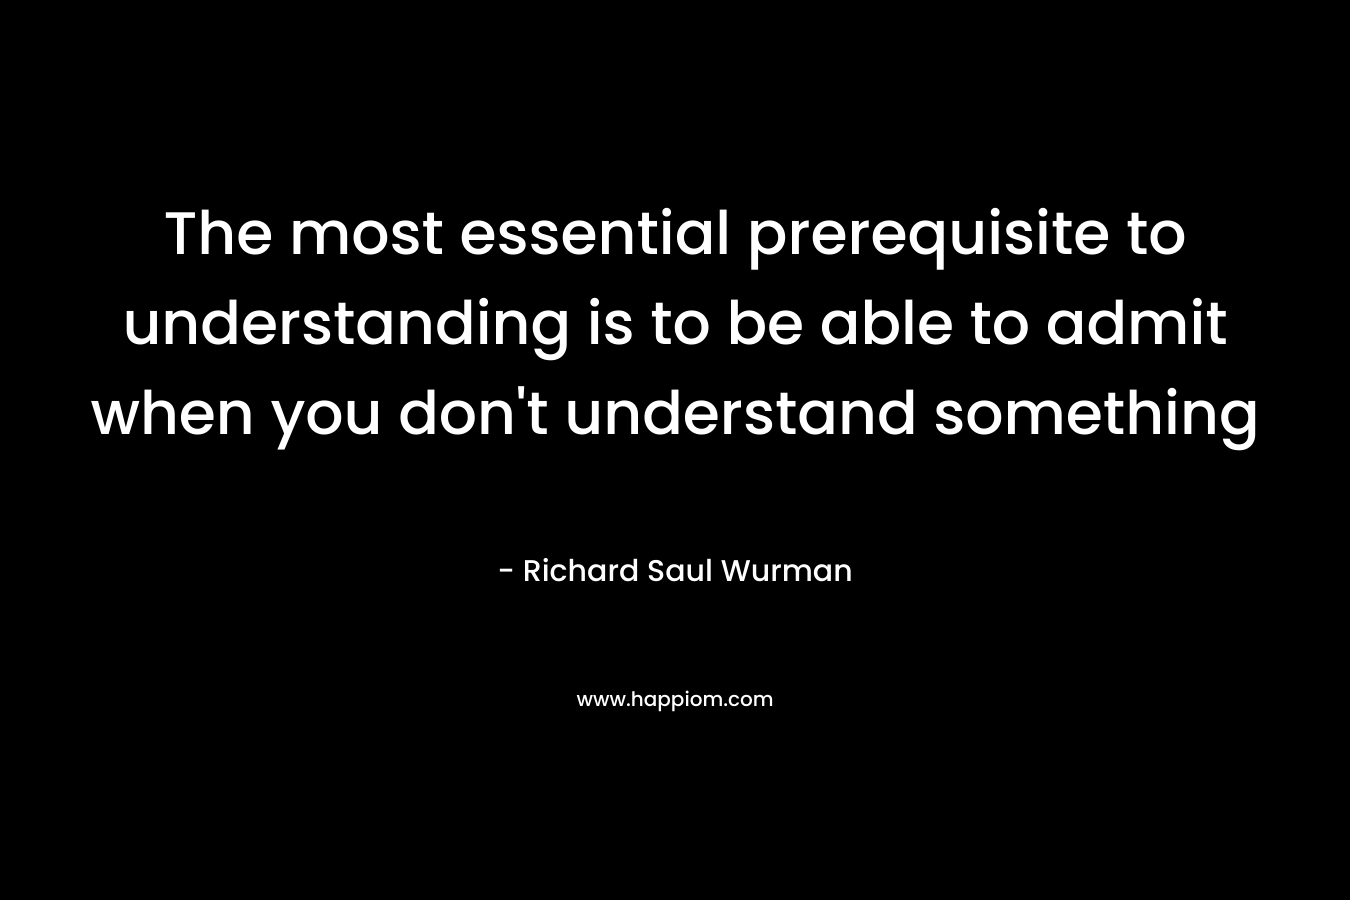 The most essential prerequisite to understanding is to be able to admit when you don't understand something